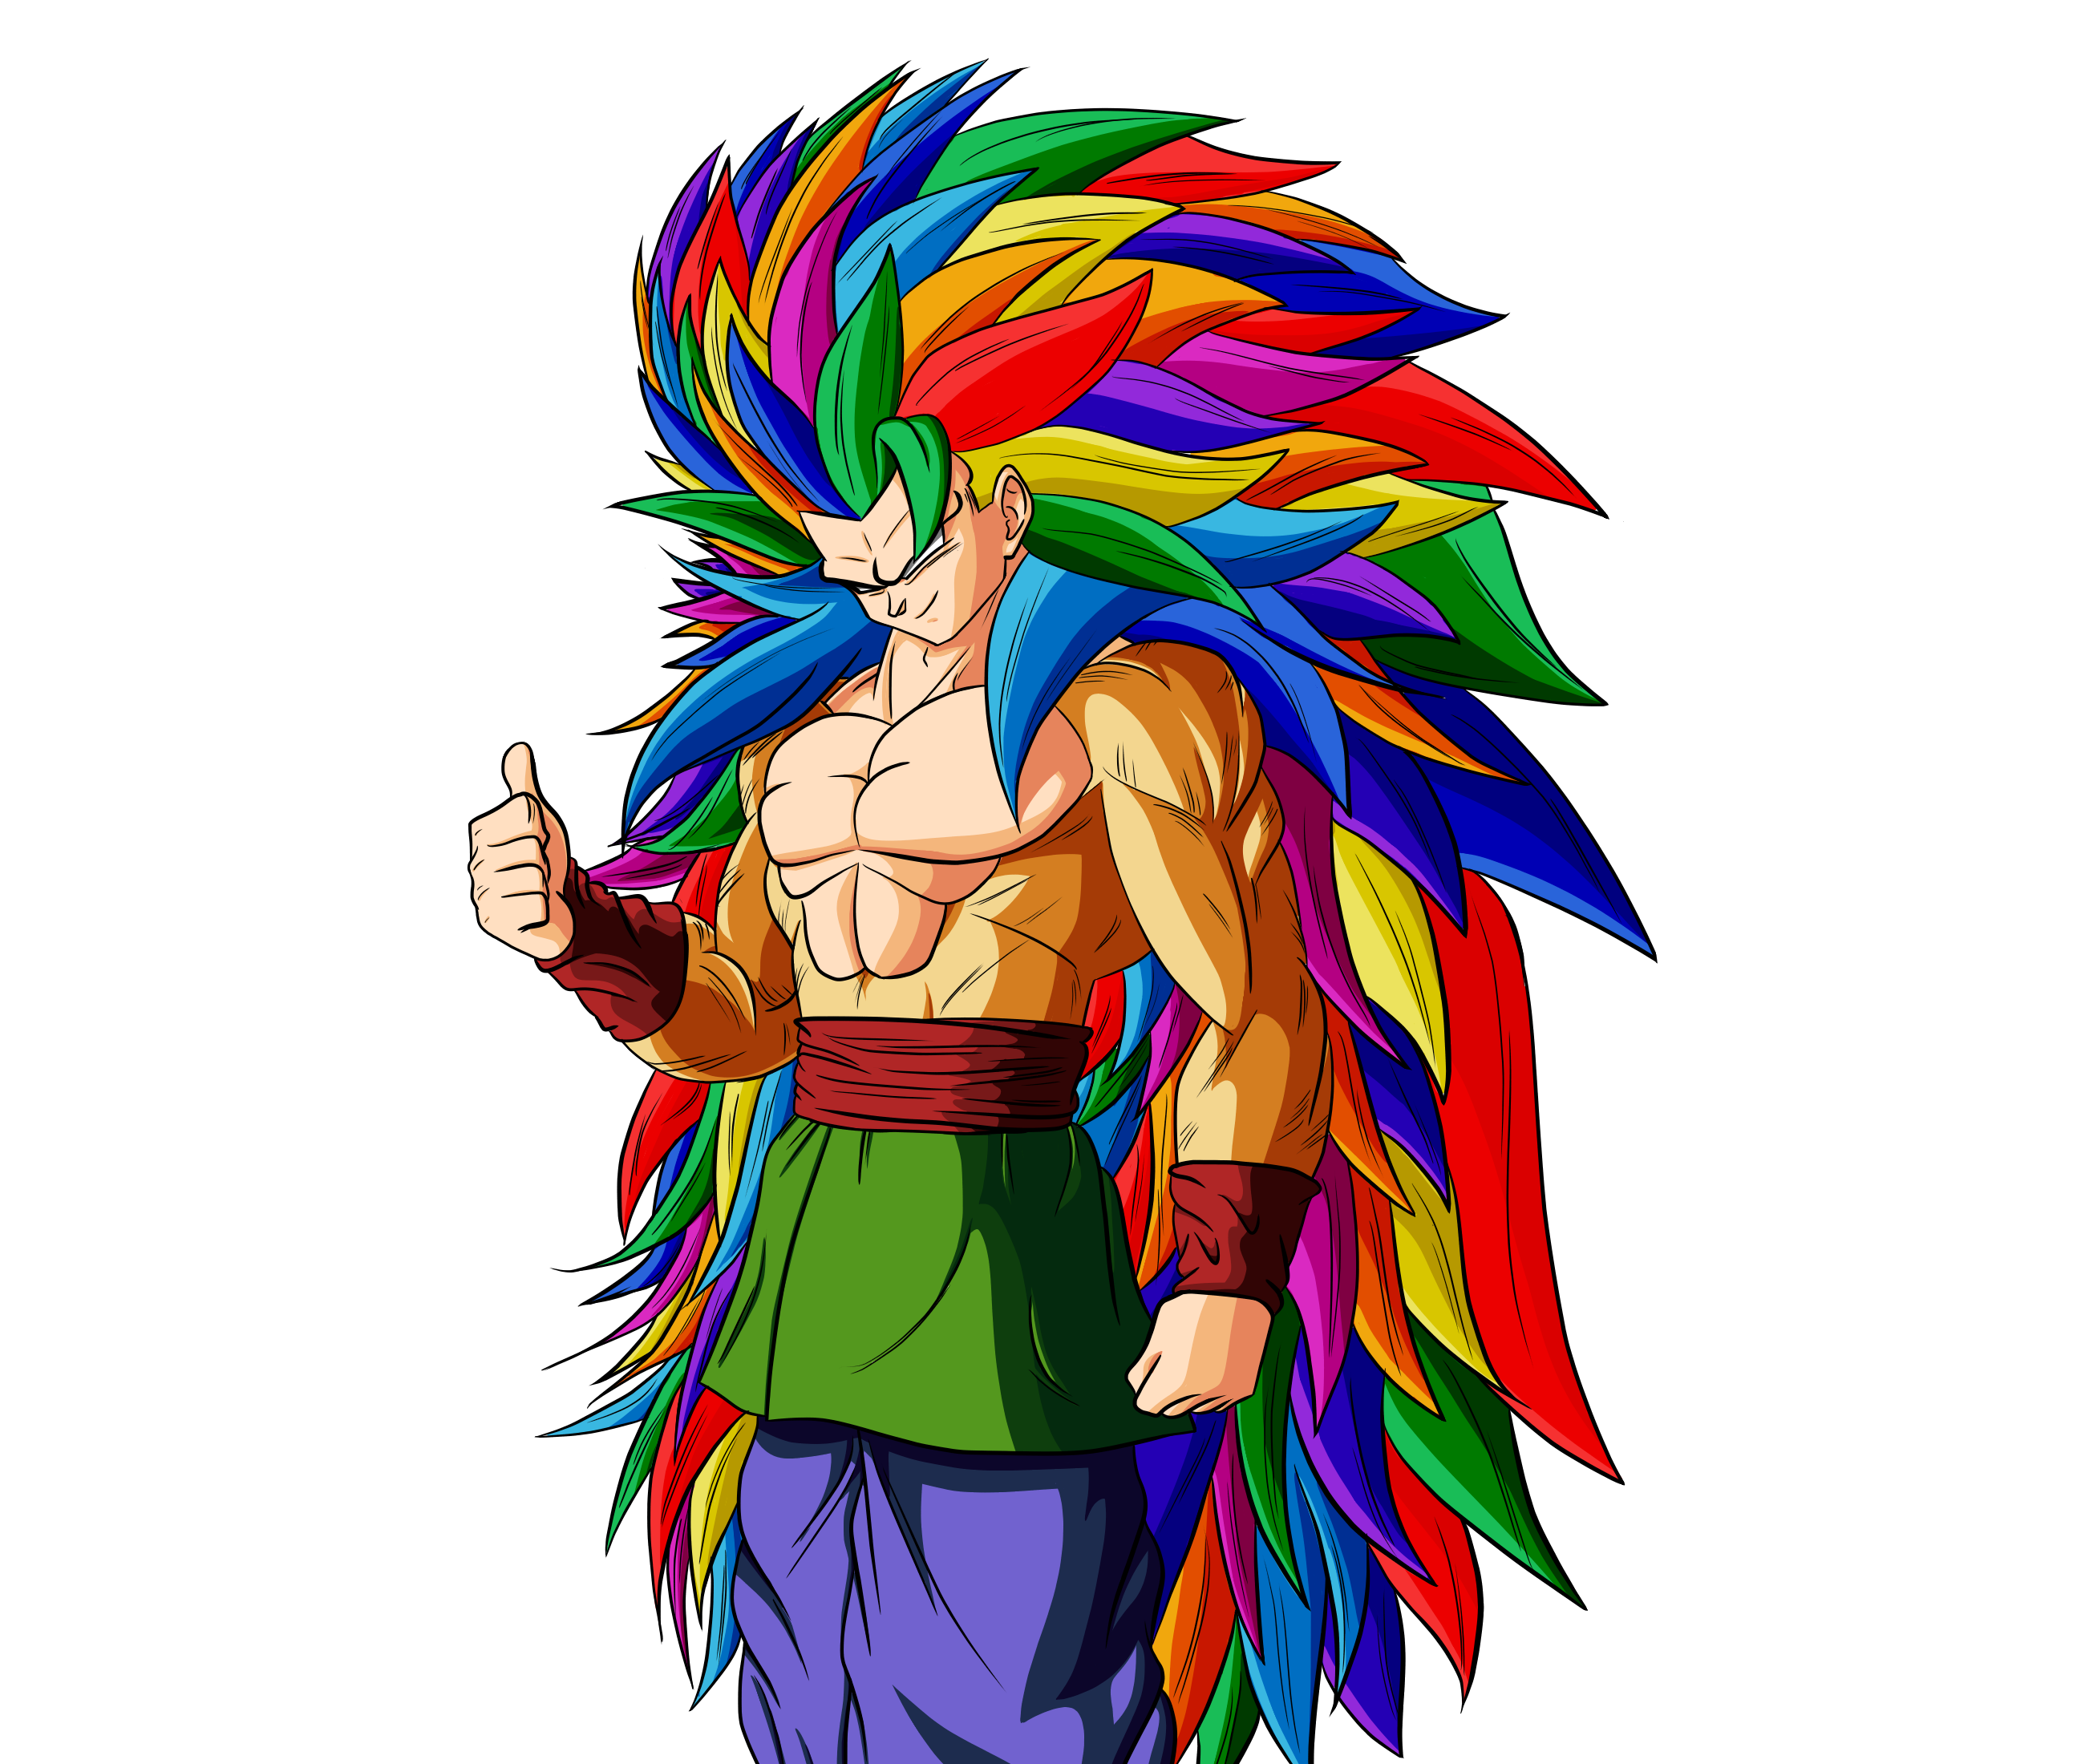 Ssj Perfecto Infinito by me by MKLEONHART on DeviantArt